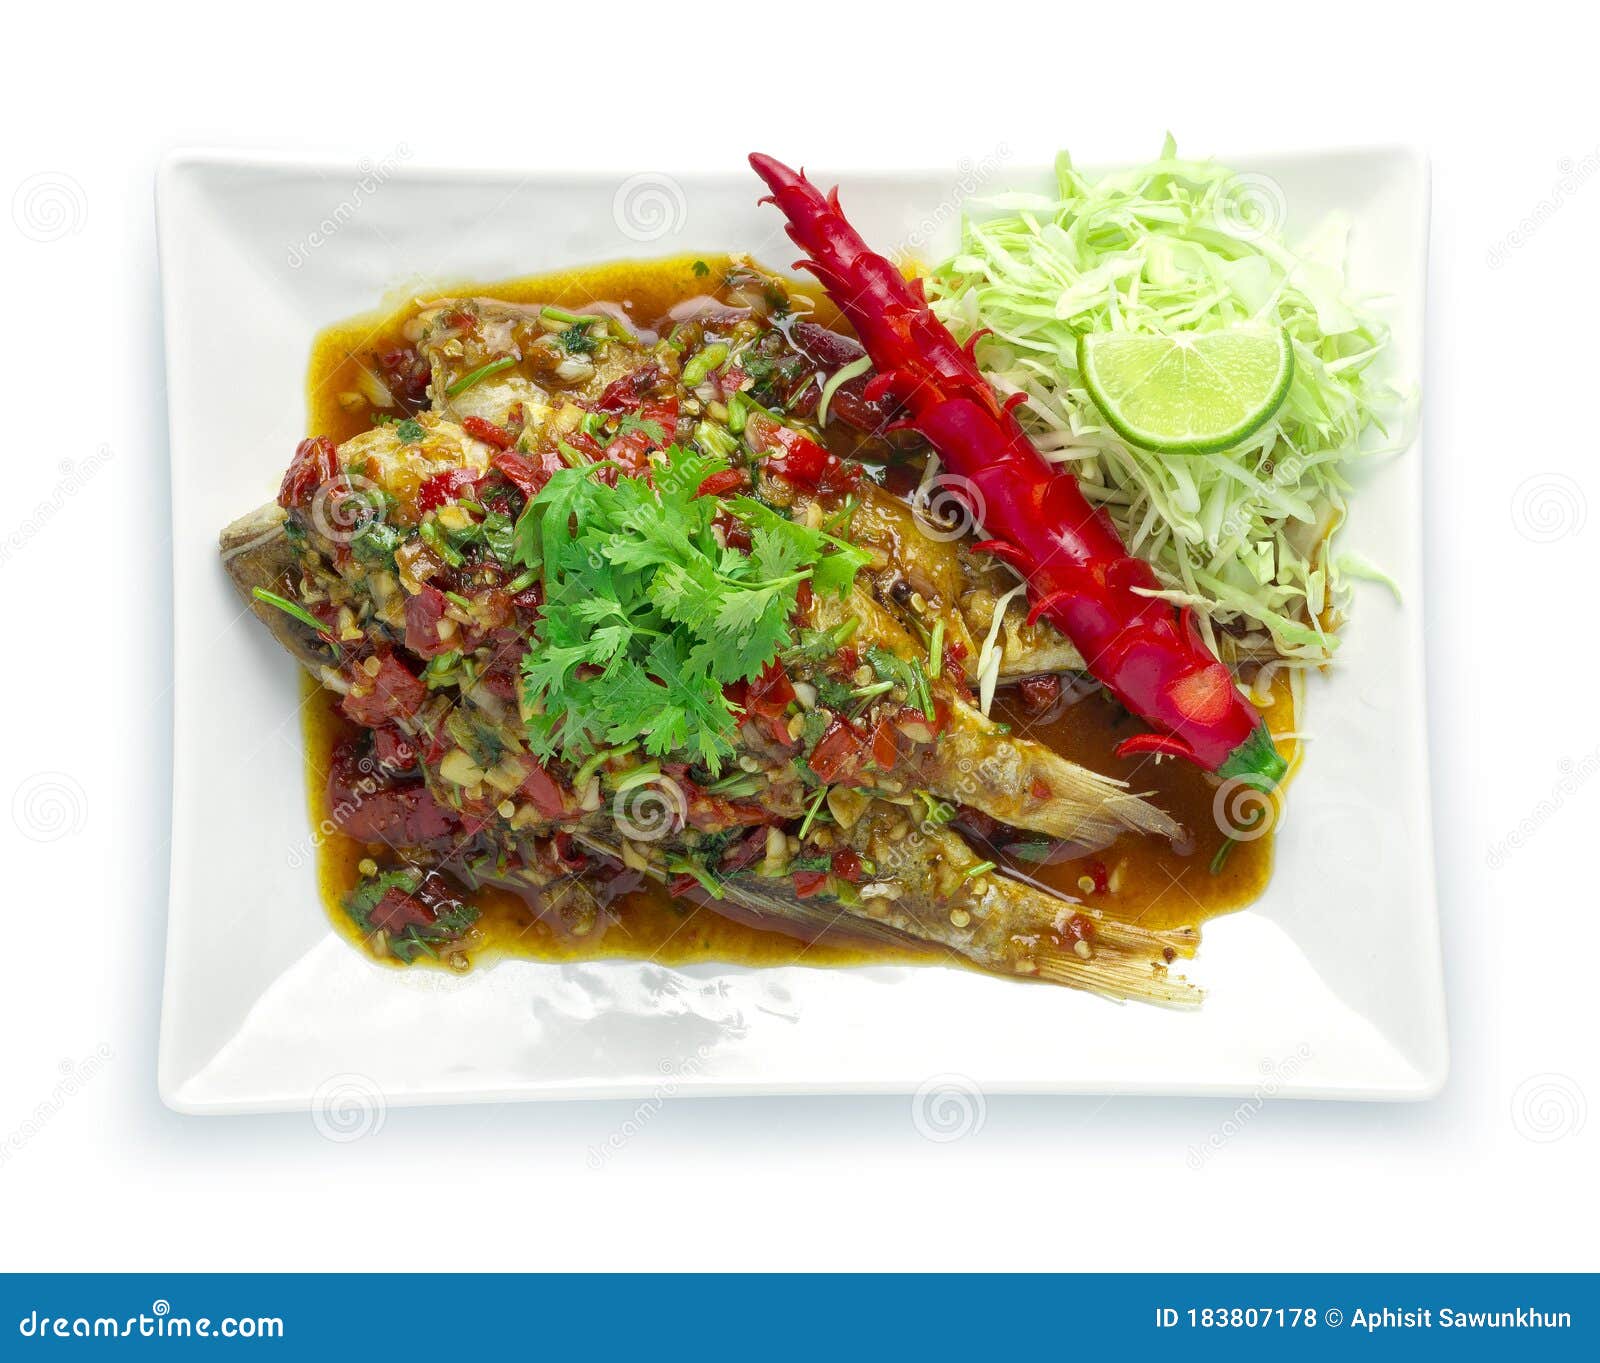 List 102+ Images thai fried fish with sweet chili sauce Latest